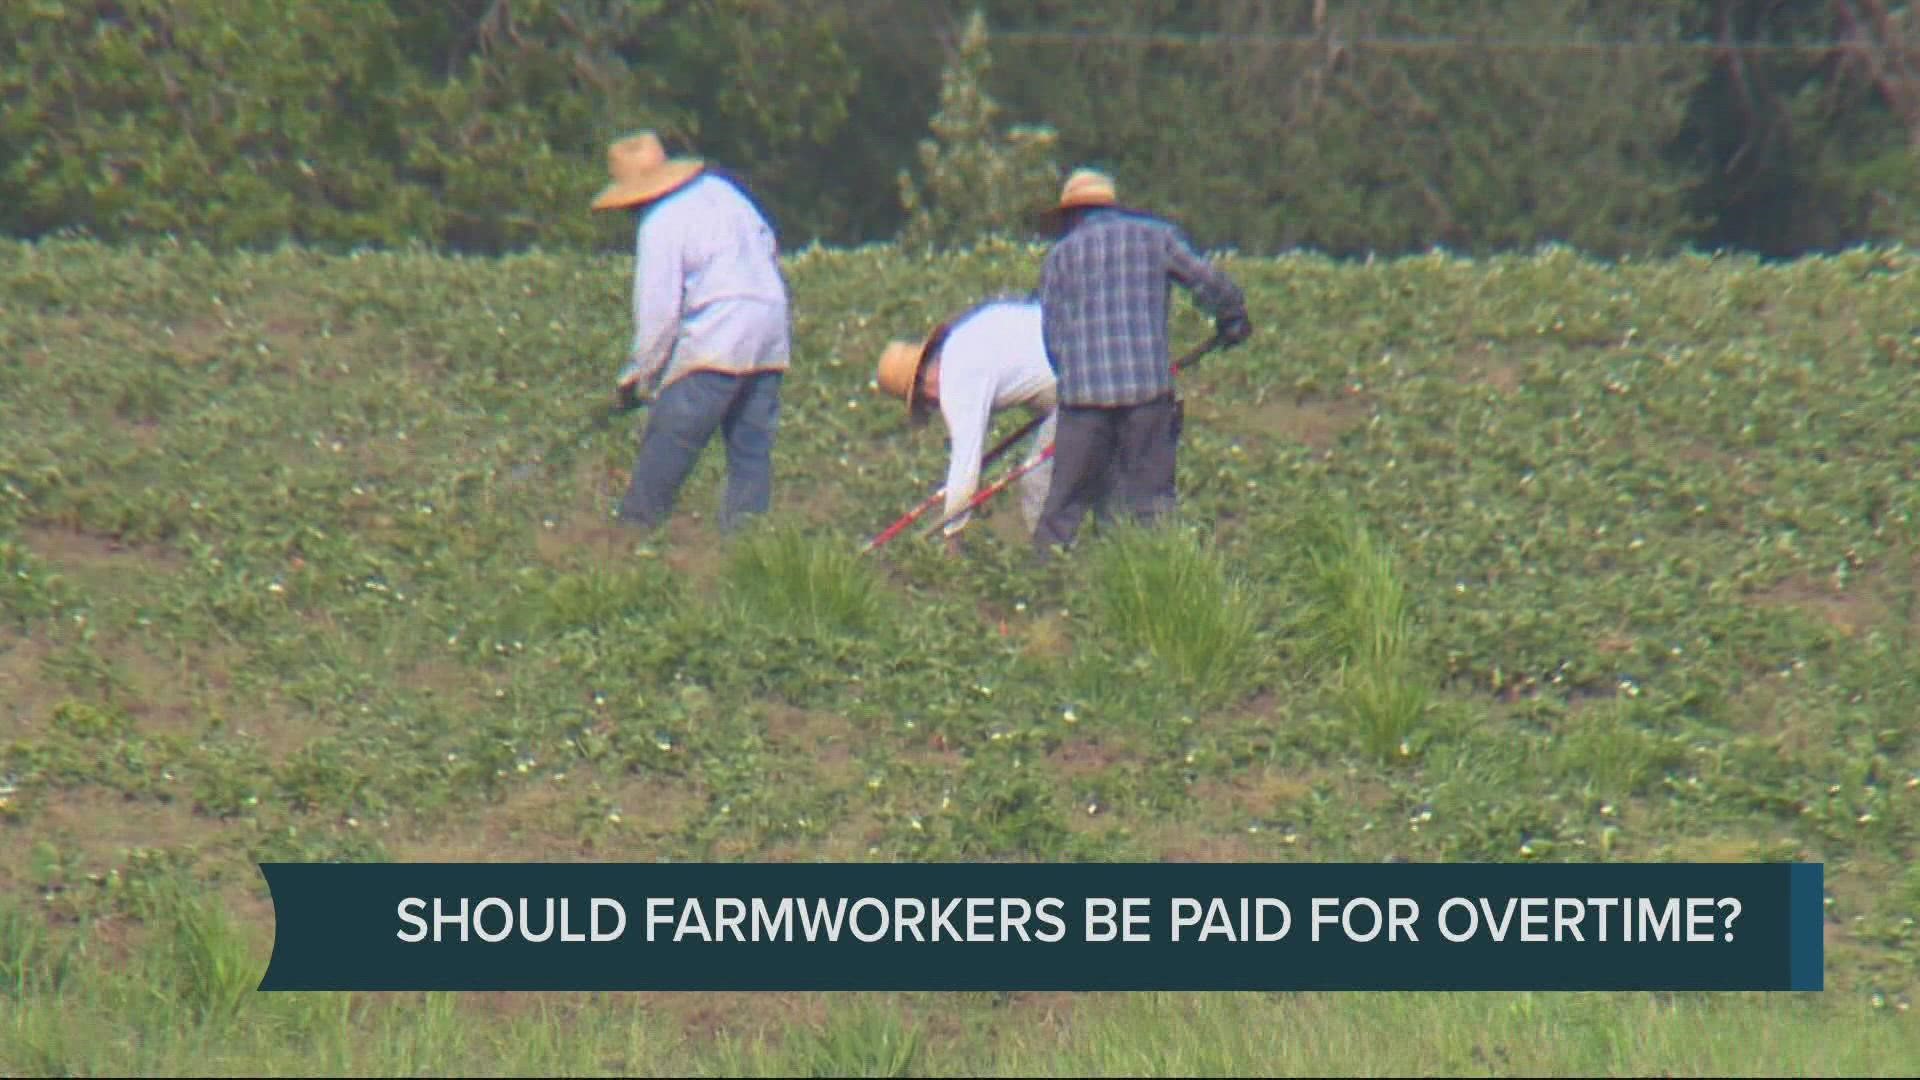 A farmer says if the bill passes, she’d likely have to move to a machine picker. Union officials say it’s a gradual change and there are provisions to help farmers a